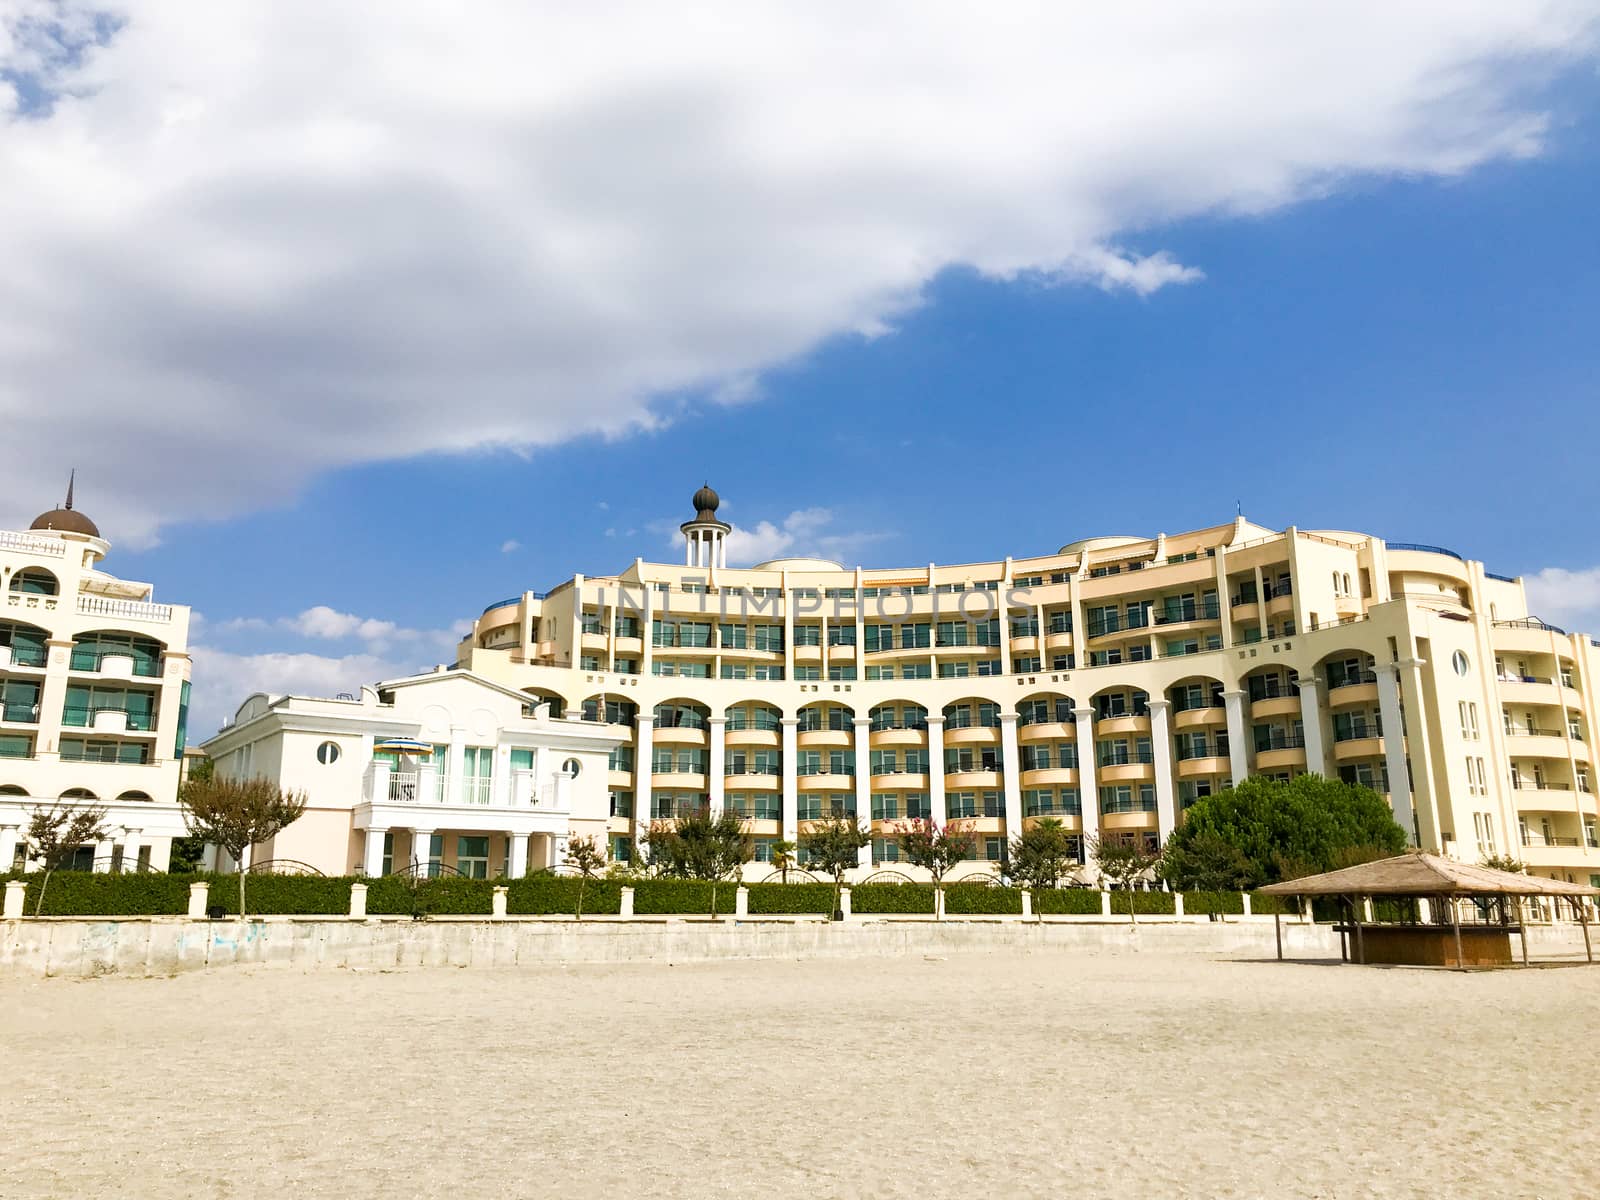 Pomorie, Bulgaria - September 12, 2019: Sunset Resort Hotel Complex Is Situated On The Seashore.